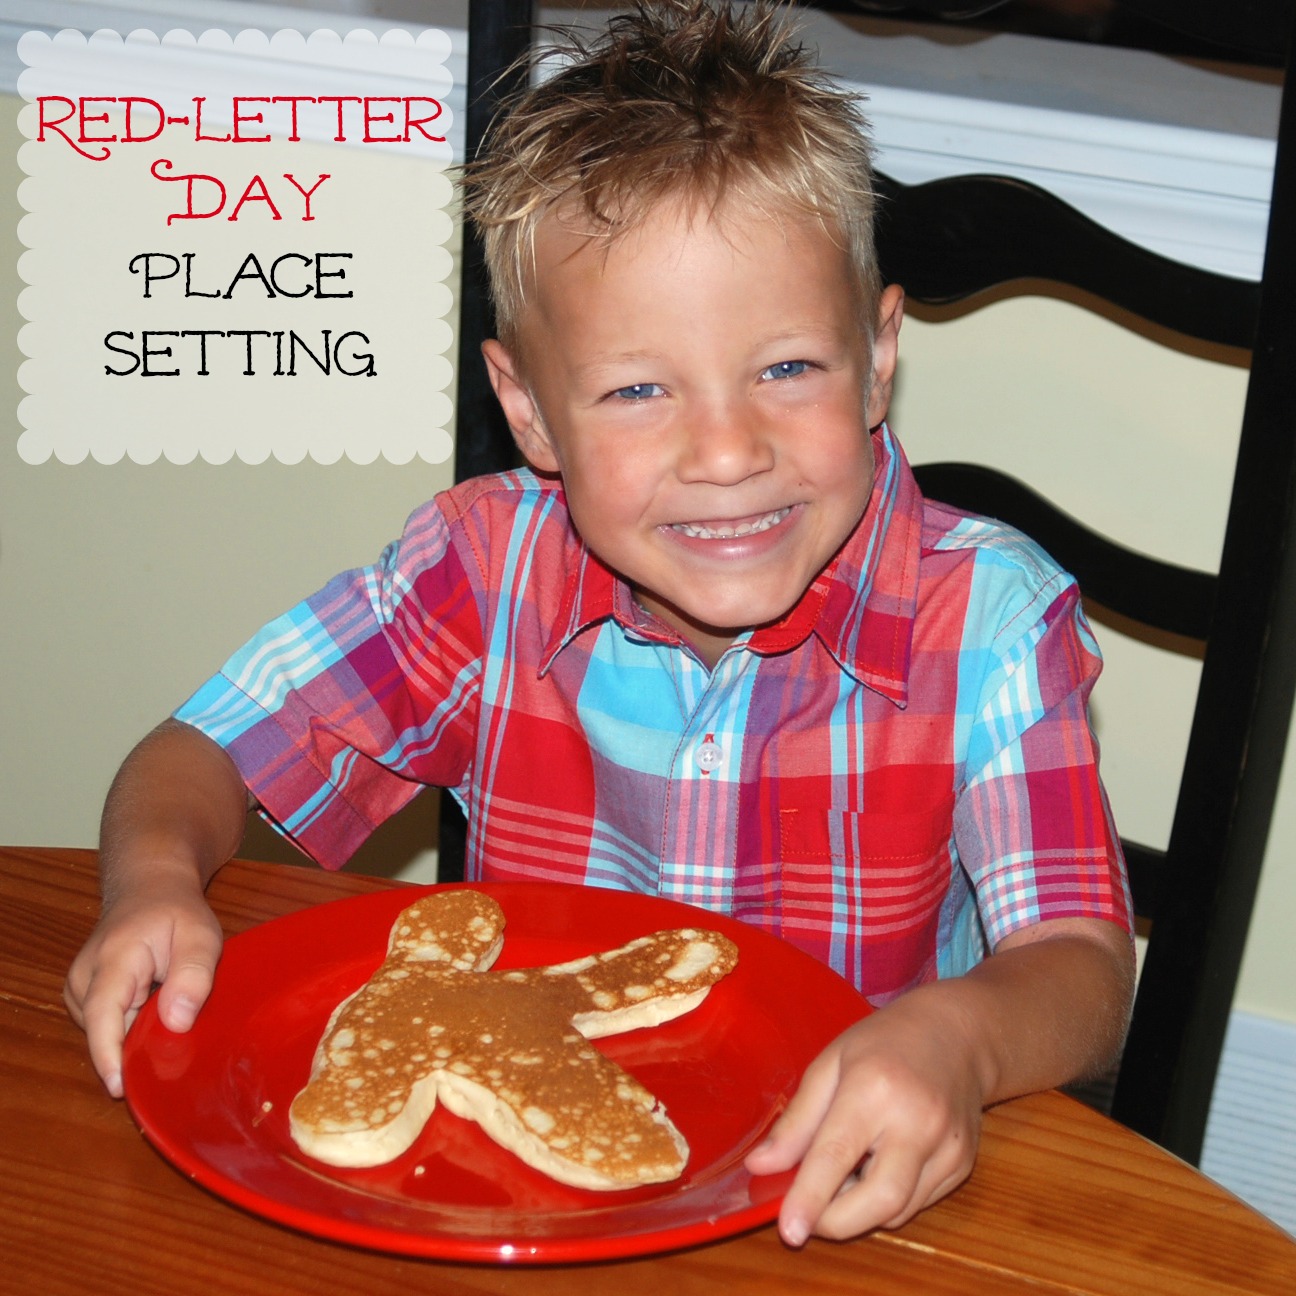 Red-Letter Day Place Setting | Endlessly Inspired